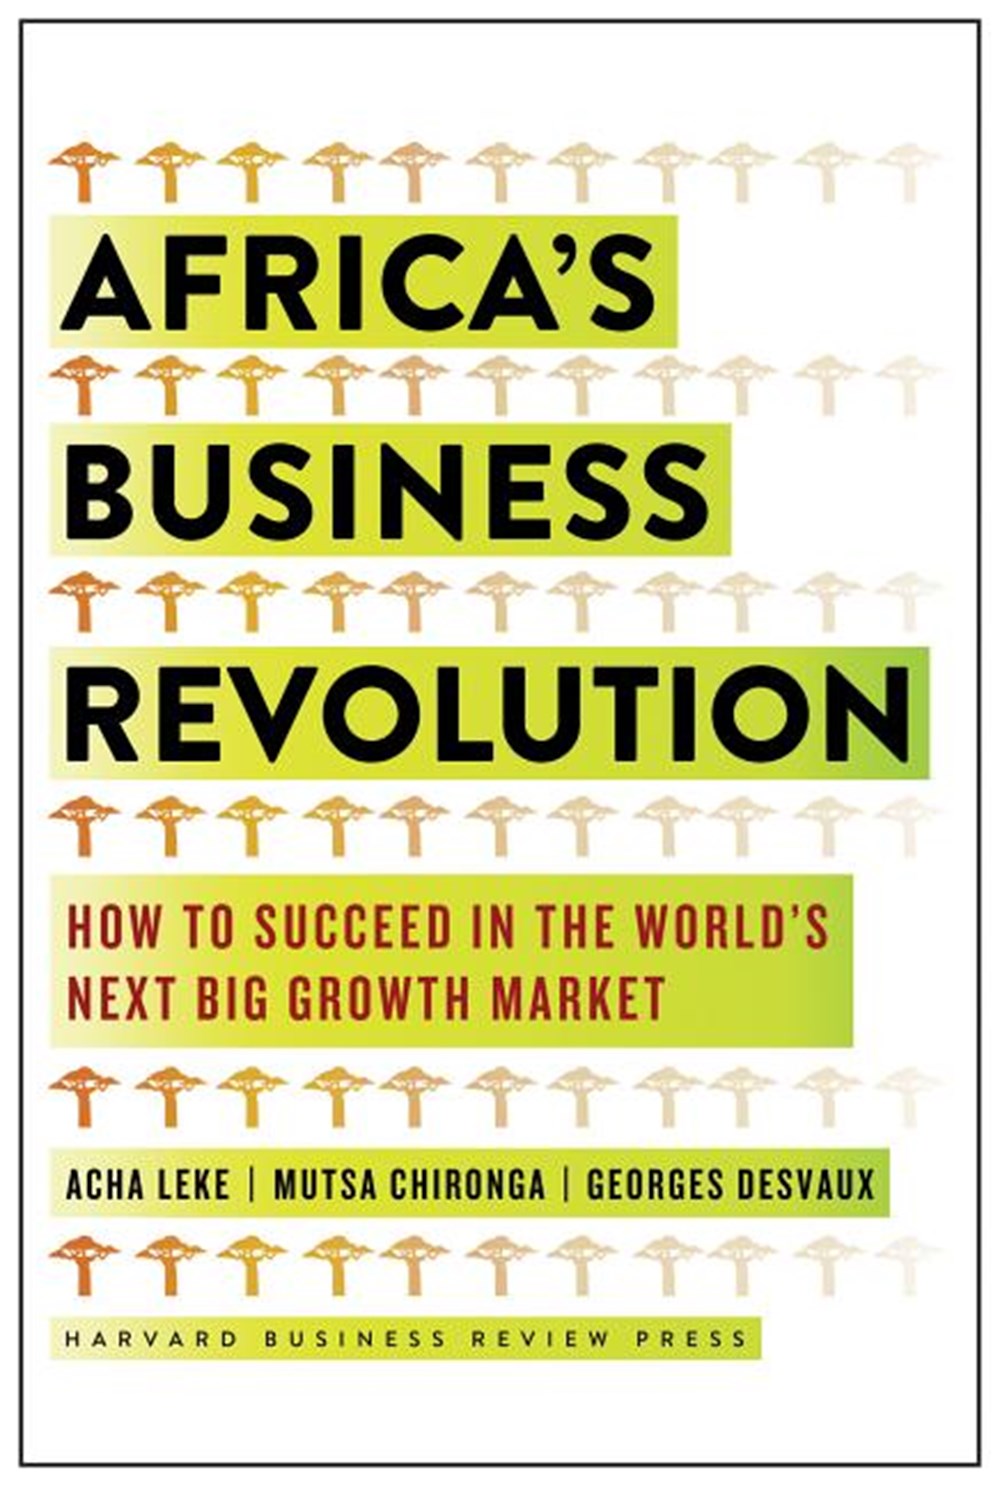 Africas Business Revolution How to Succeed in the Worlds Next Big Growth Market